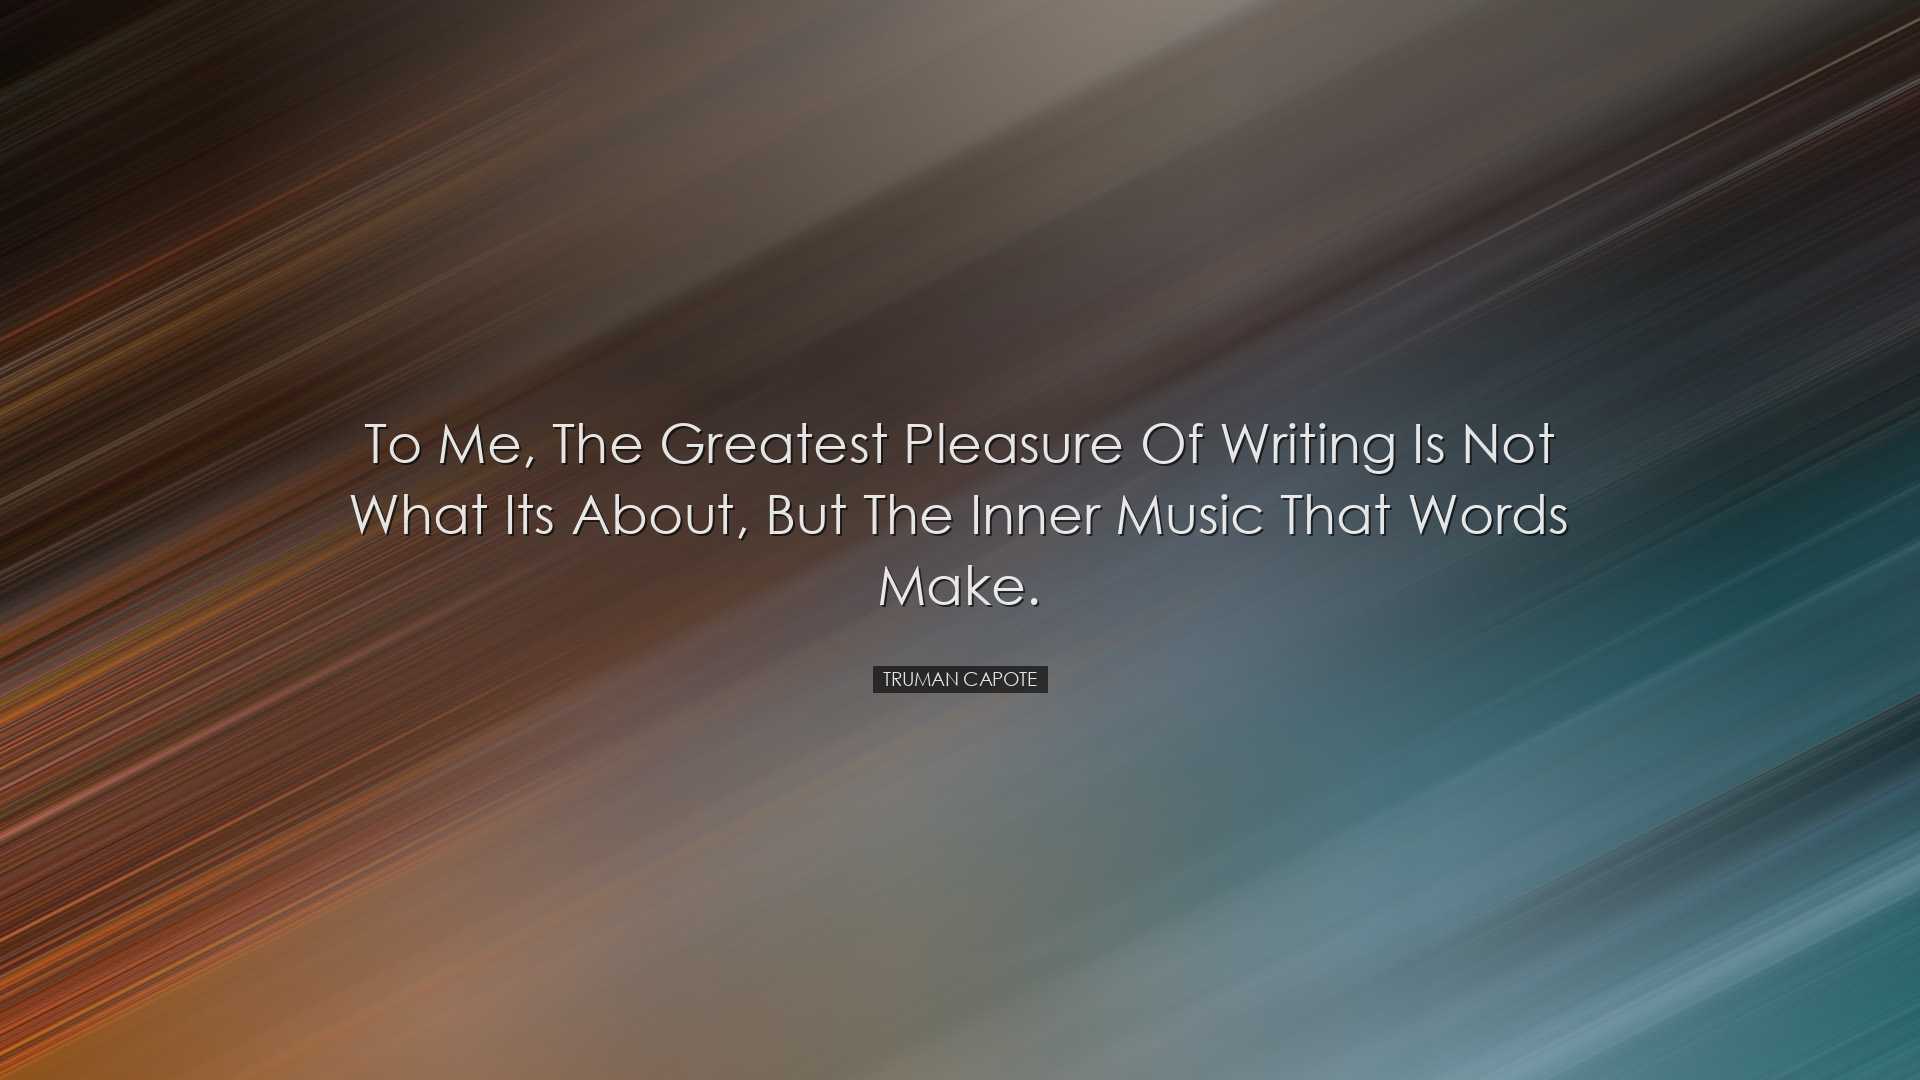 To me, the greatest pleasure of writing is not what its about, but